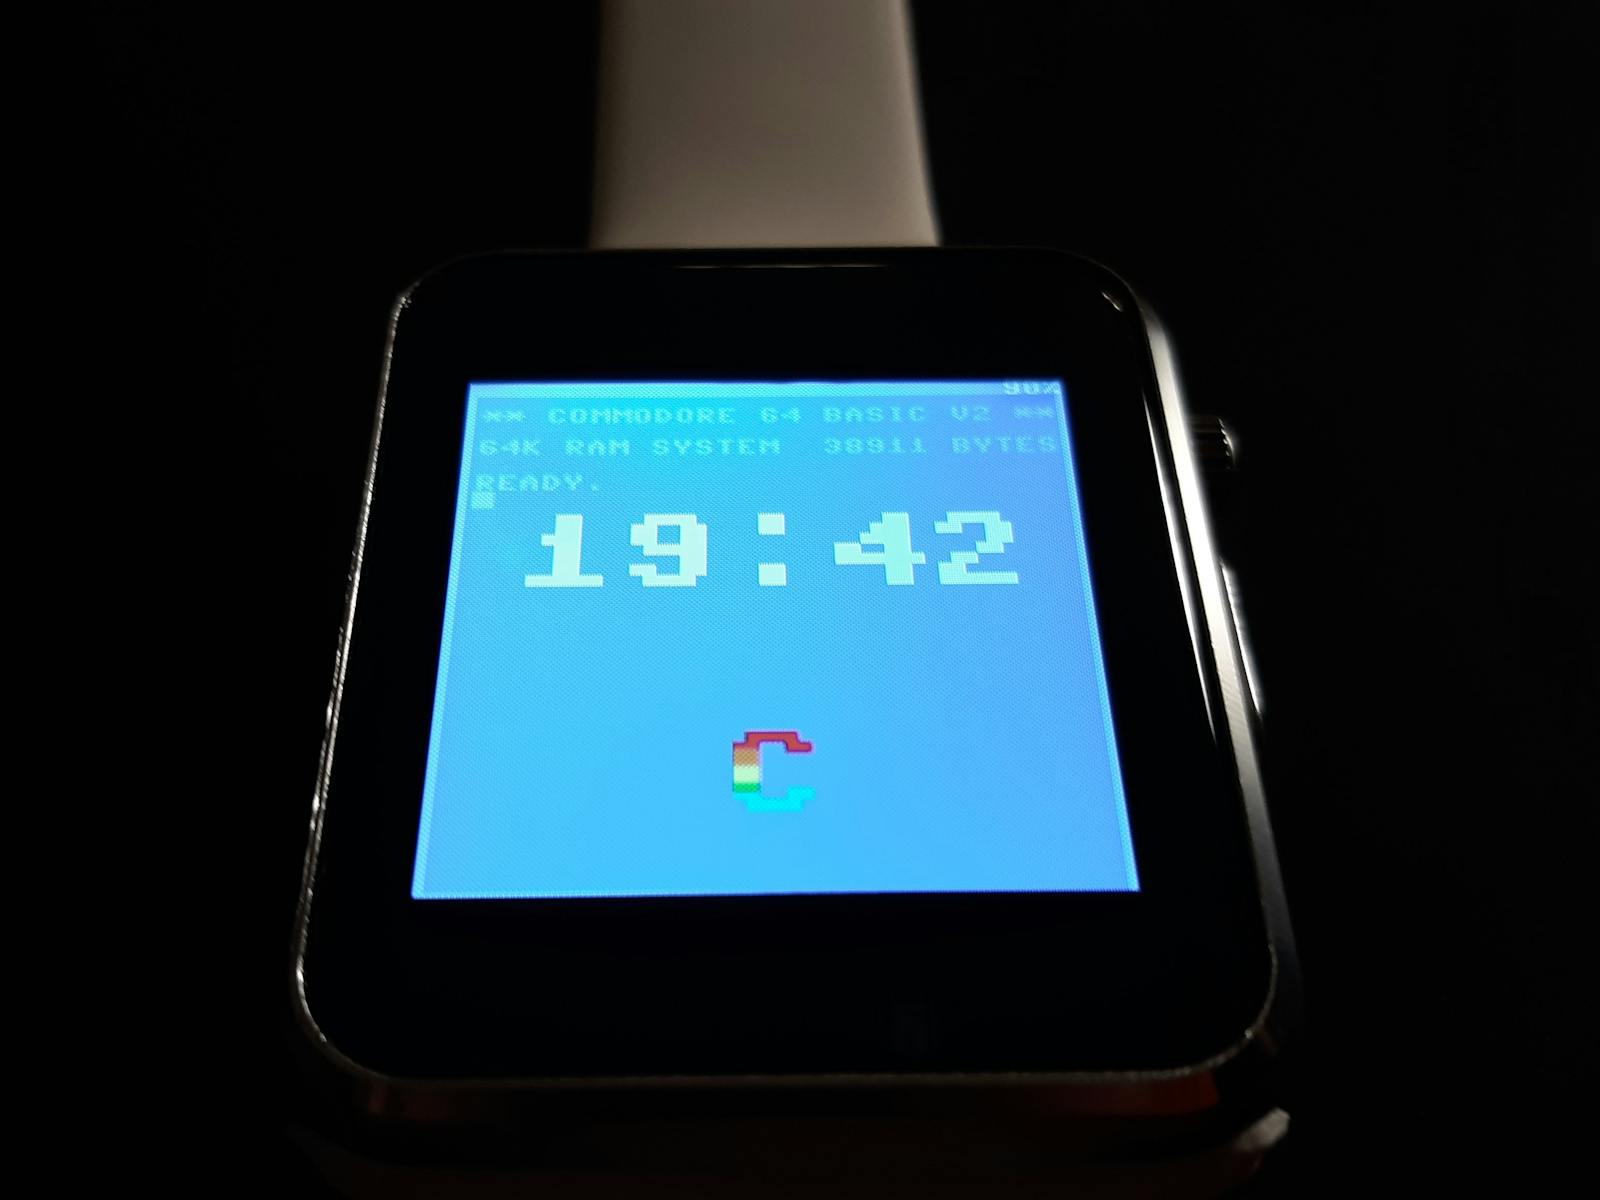 C64 Watch is a customized T-Watch 2020 that was inspired by the Commodore 64 computer. It features a C64 theme and a built-in BASIC interpreter. How I